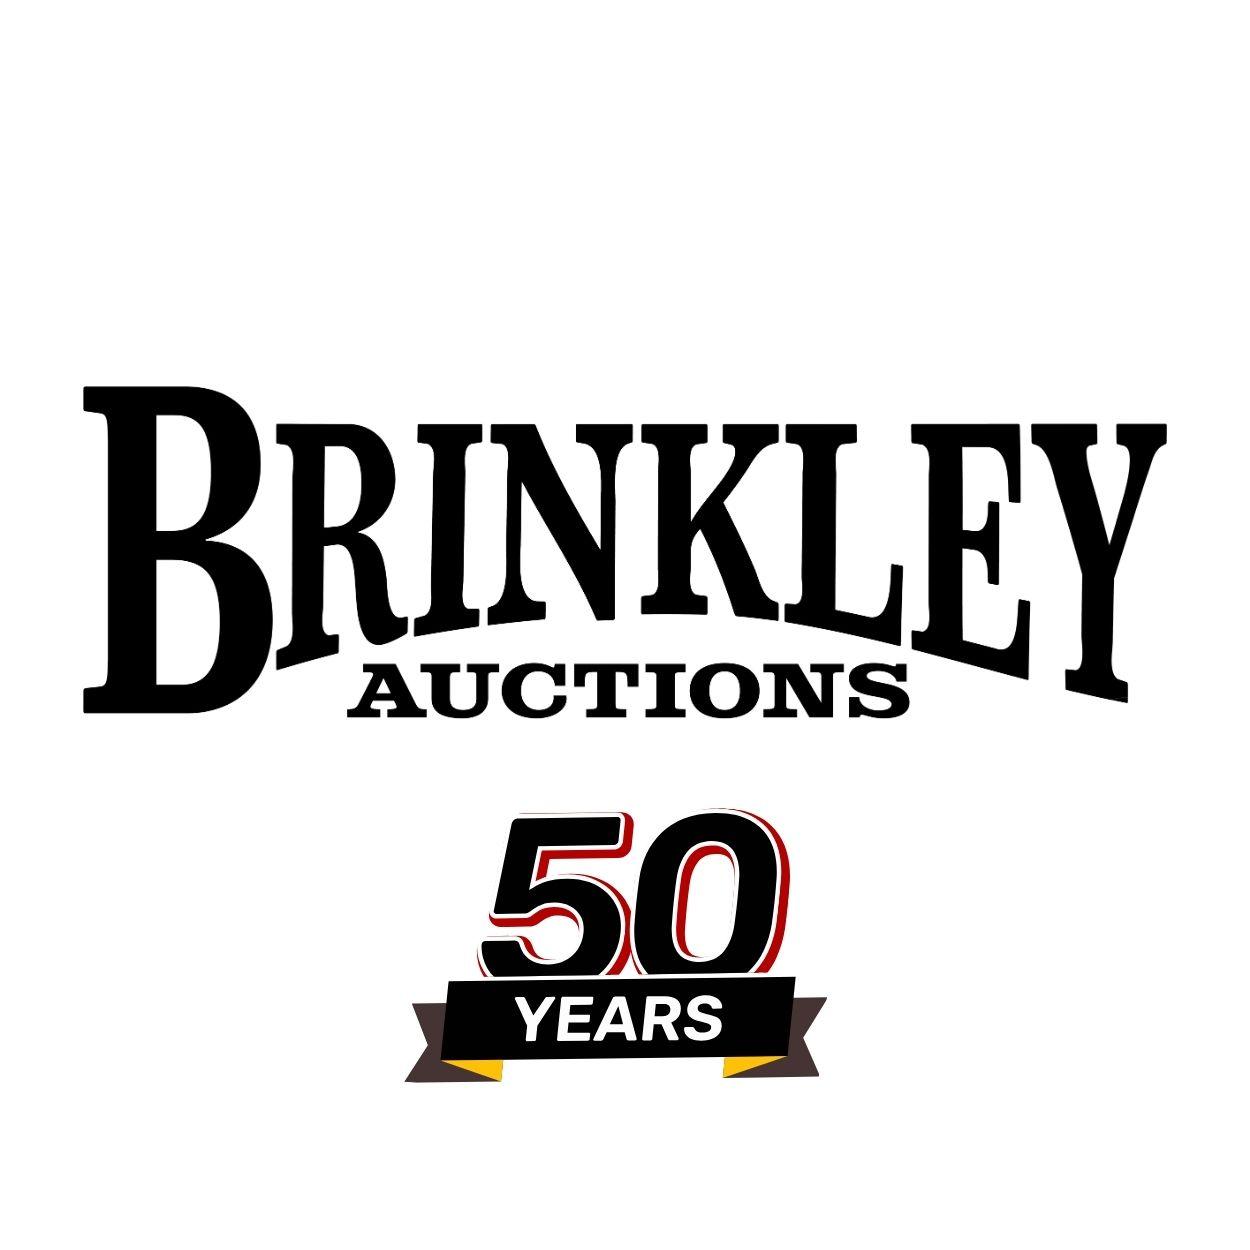 Brinkley Auctions Inc.